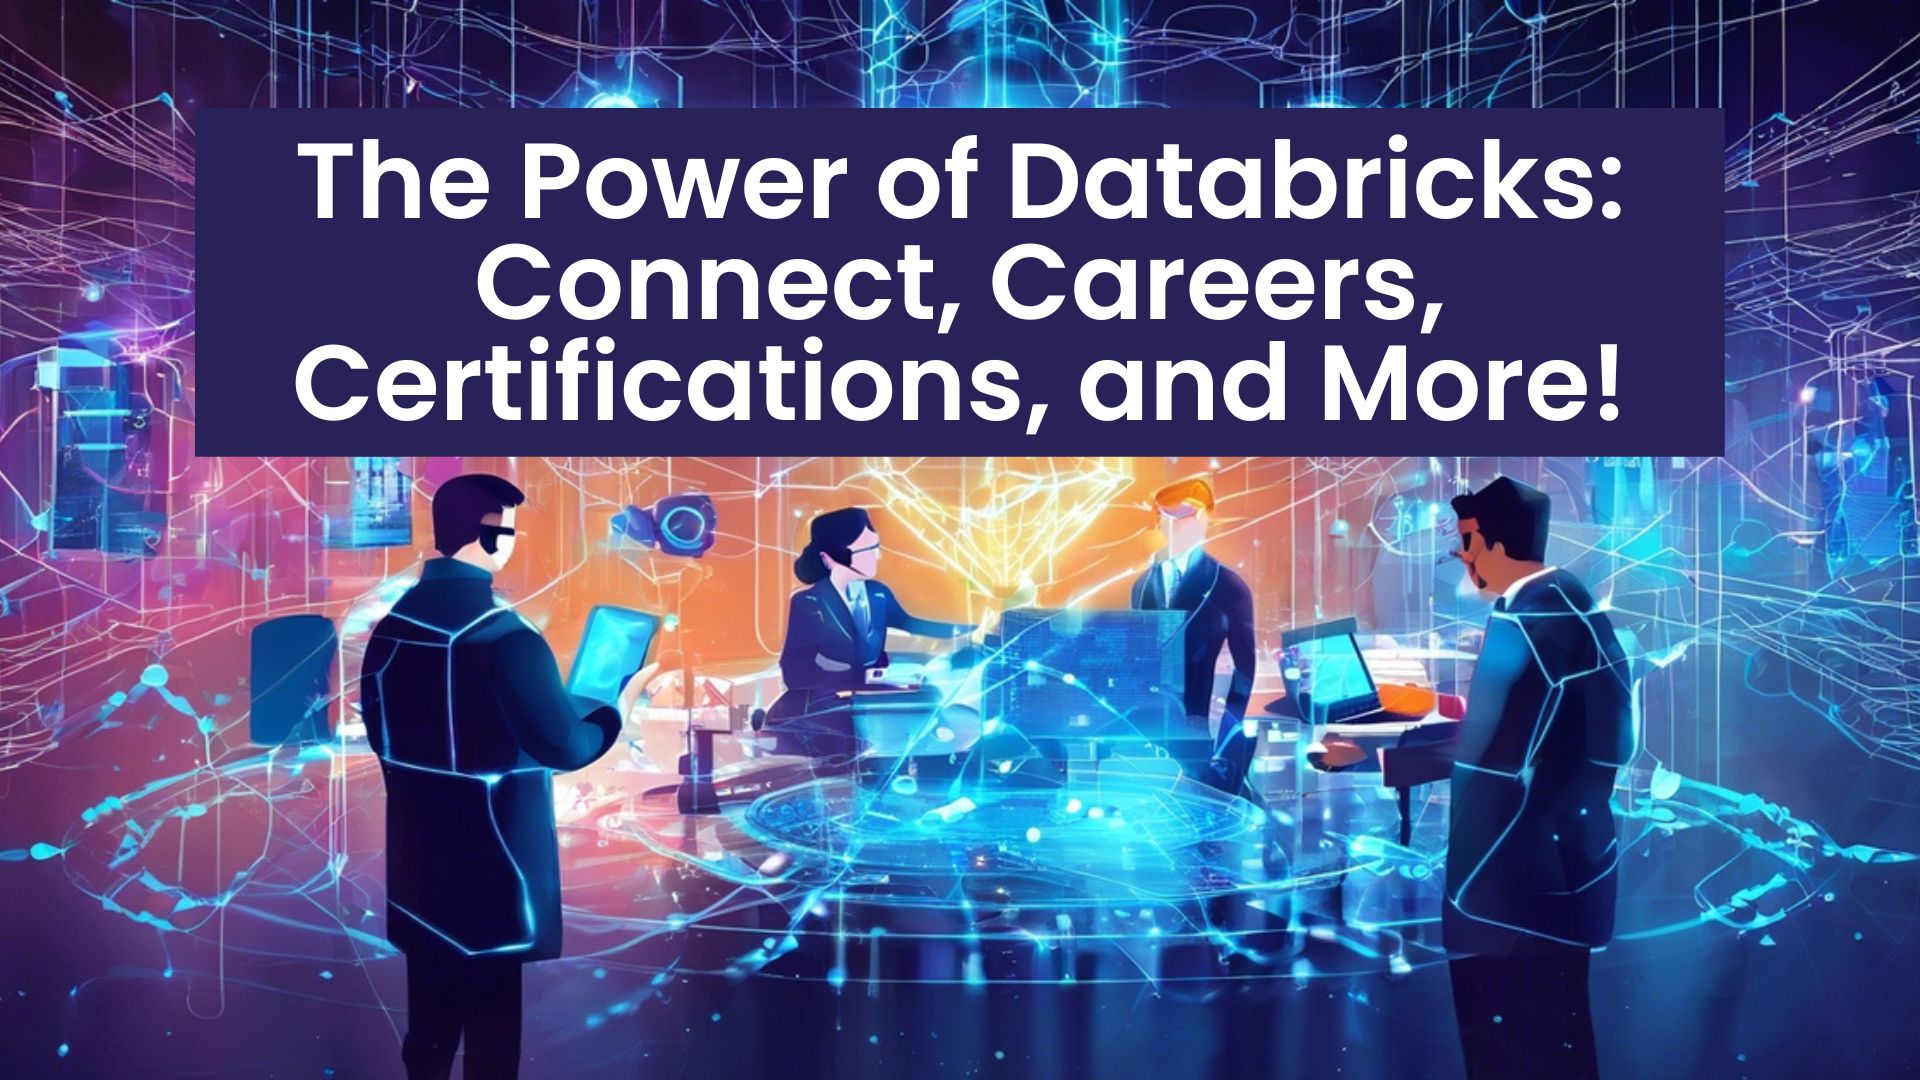 The Power of Databricks Connect, Careers, Certifications, and More!